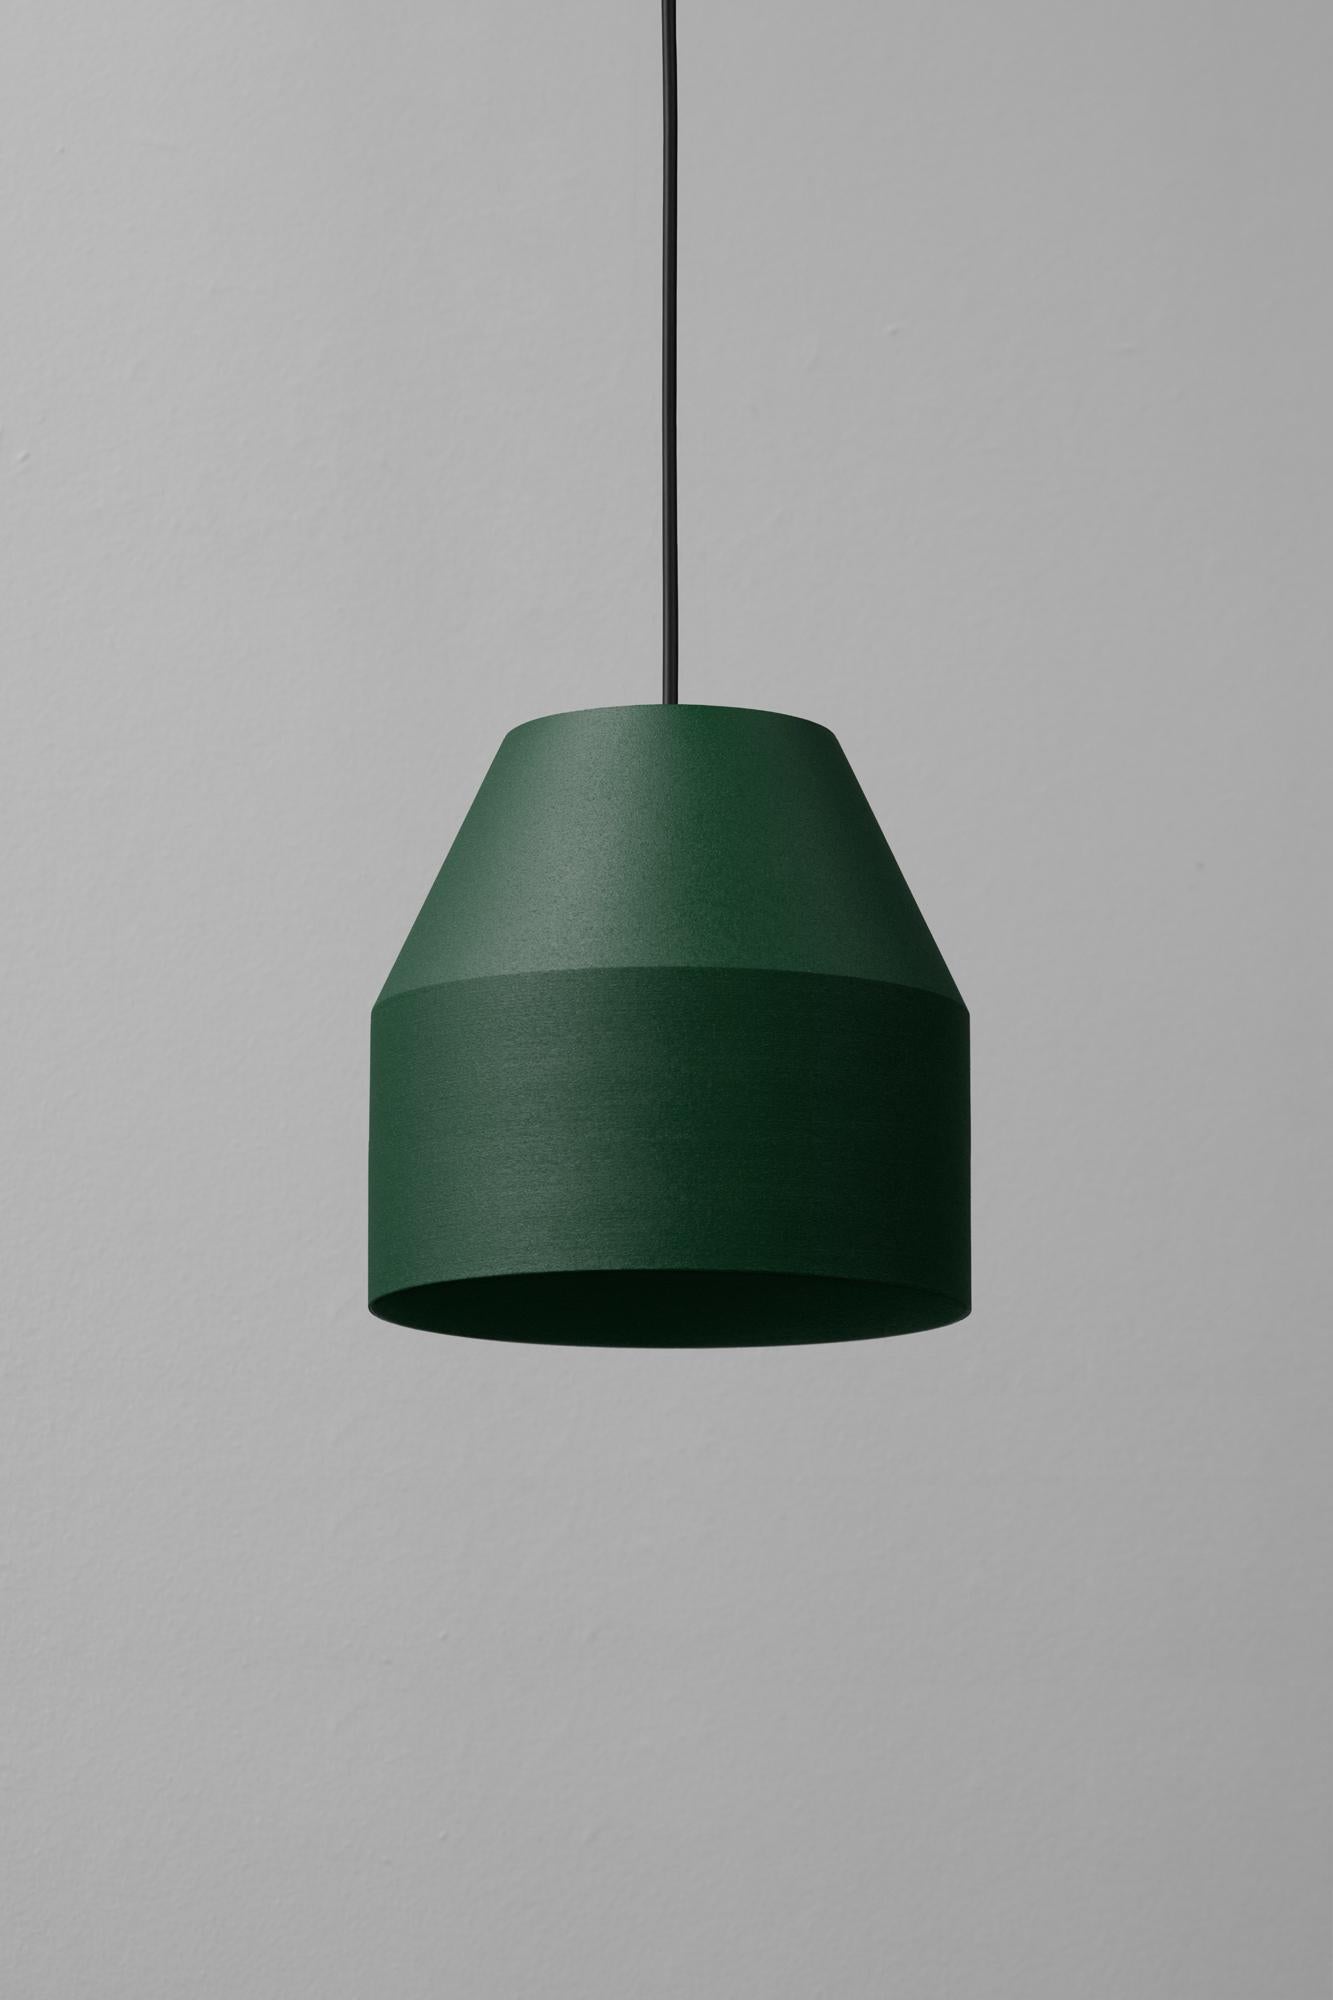 Big Forest Cap Pendant Lamp by +kouple
Dimensions: Ø 16 x H 16,5 cm. 
Materials: Powder-coated steel.

Available in different color options. The rod length is 200 cm. Please contact us.

All our lamps can be wired according to each country. If sold